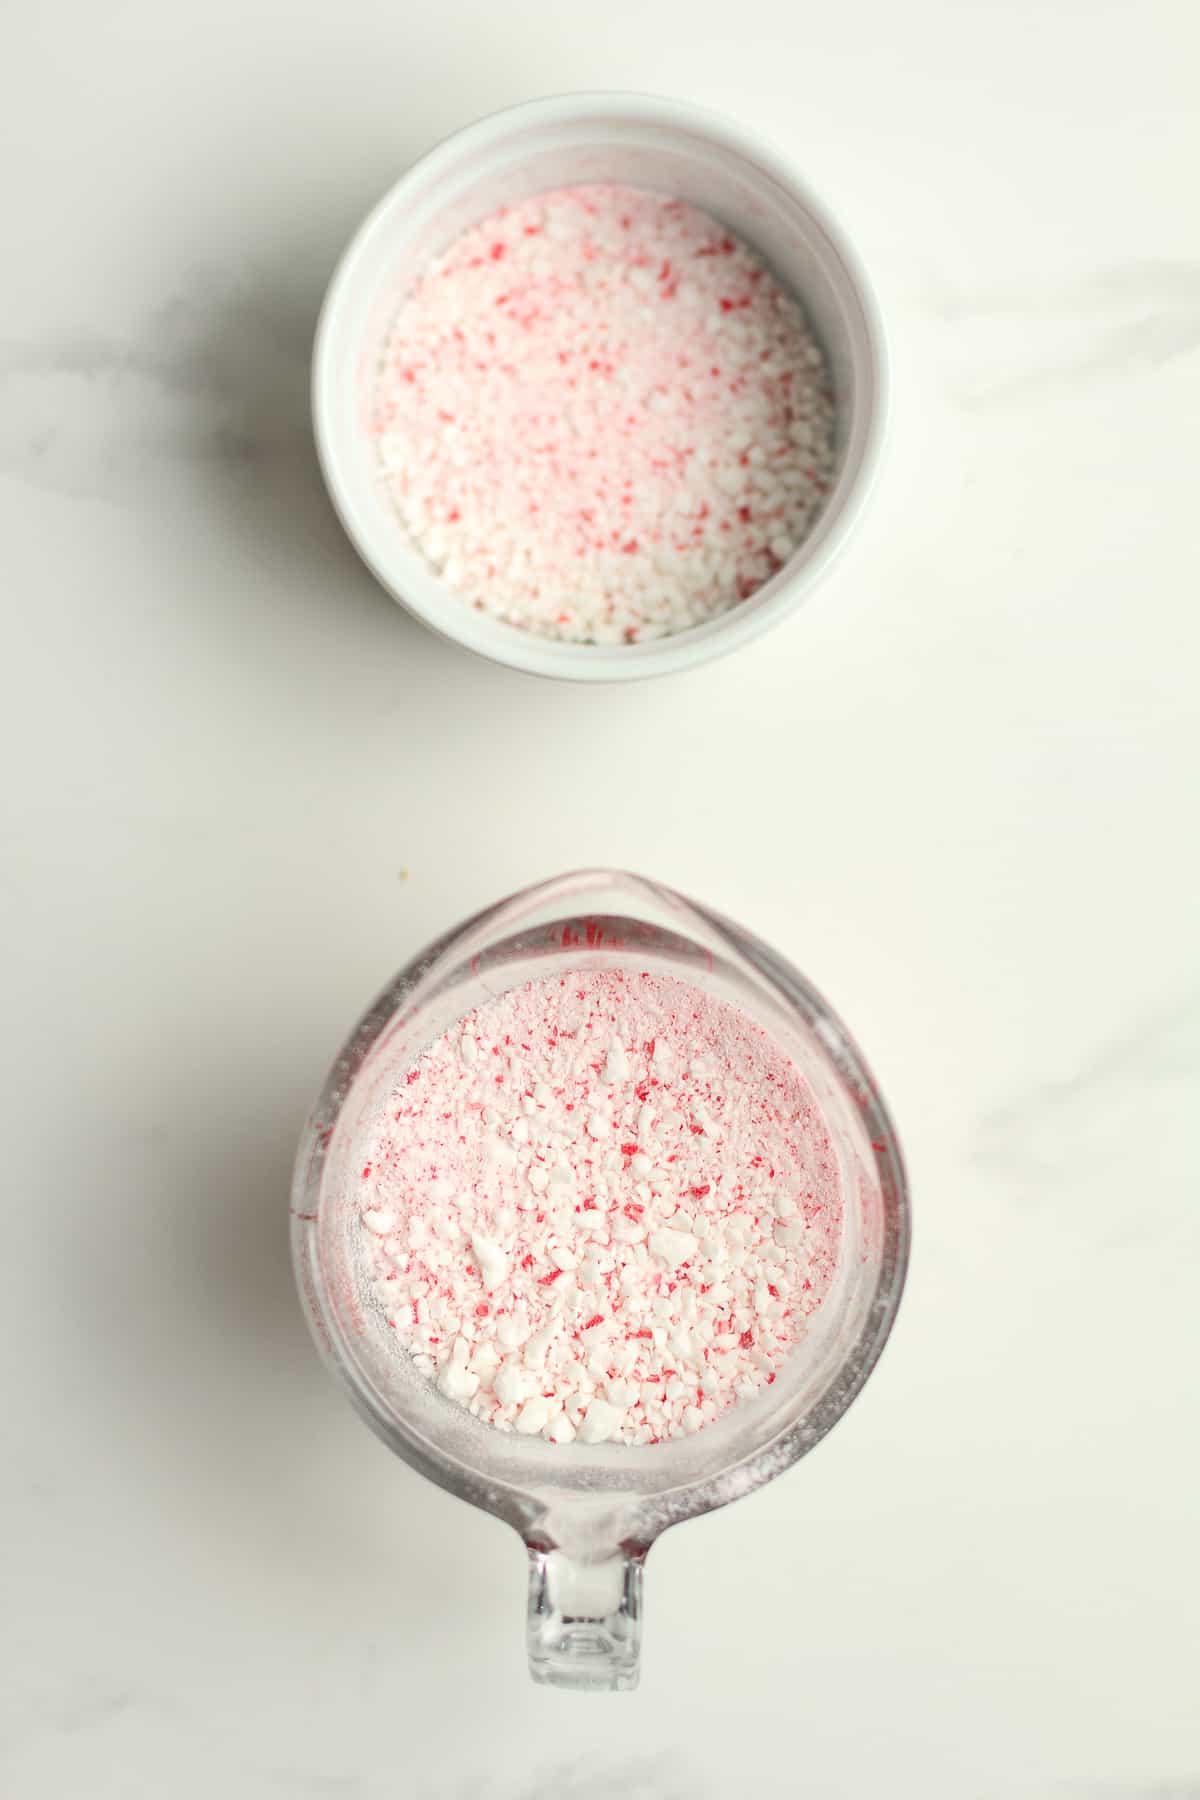 A measuring cup of crushed peppermint and a small bowl of reserved peppermint.